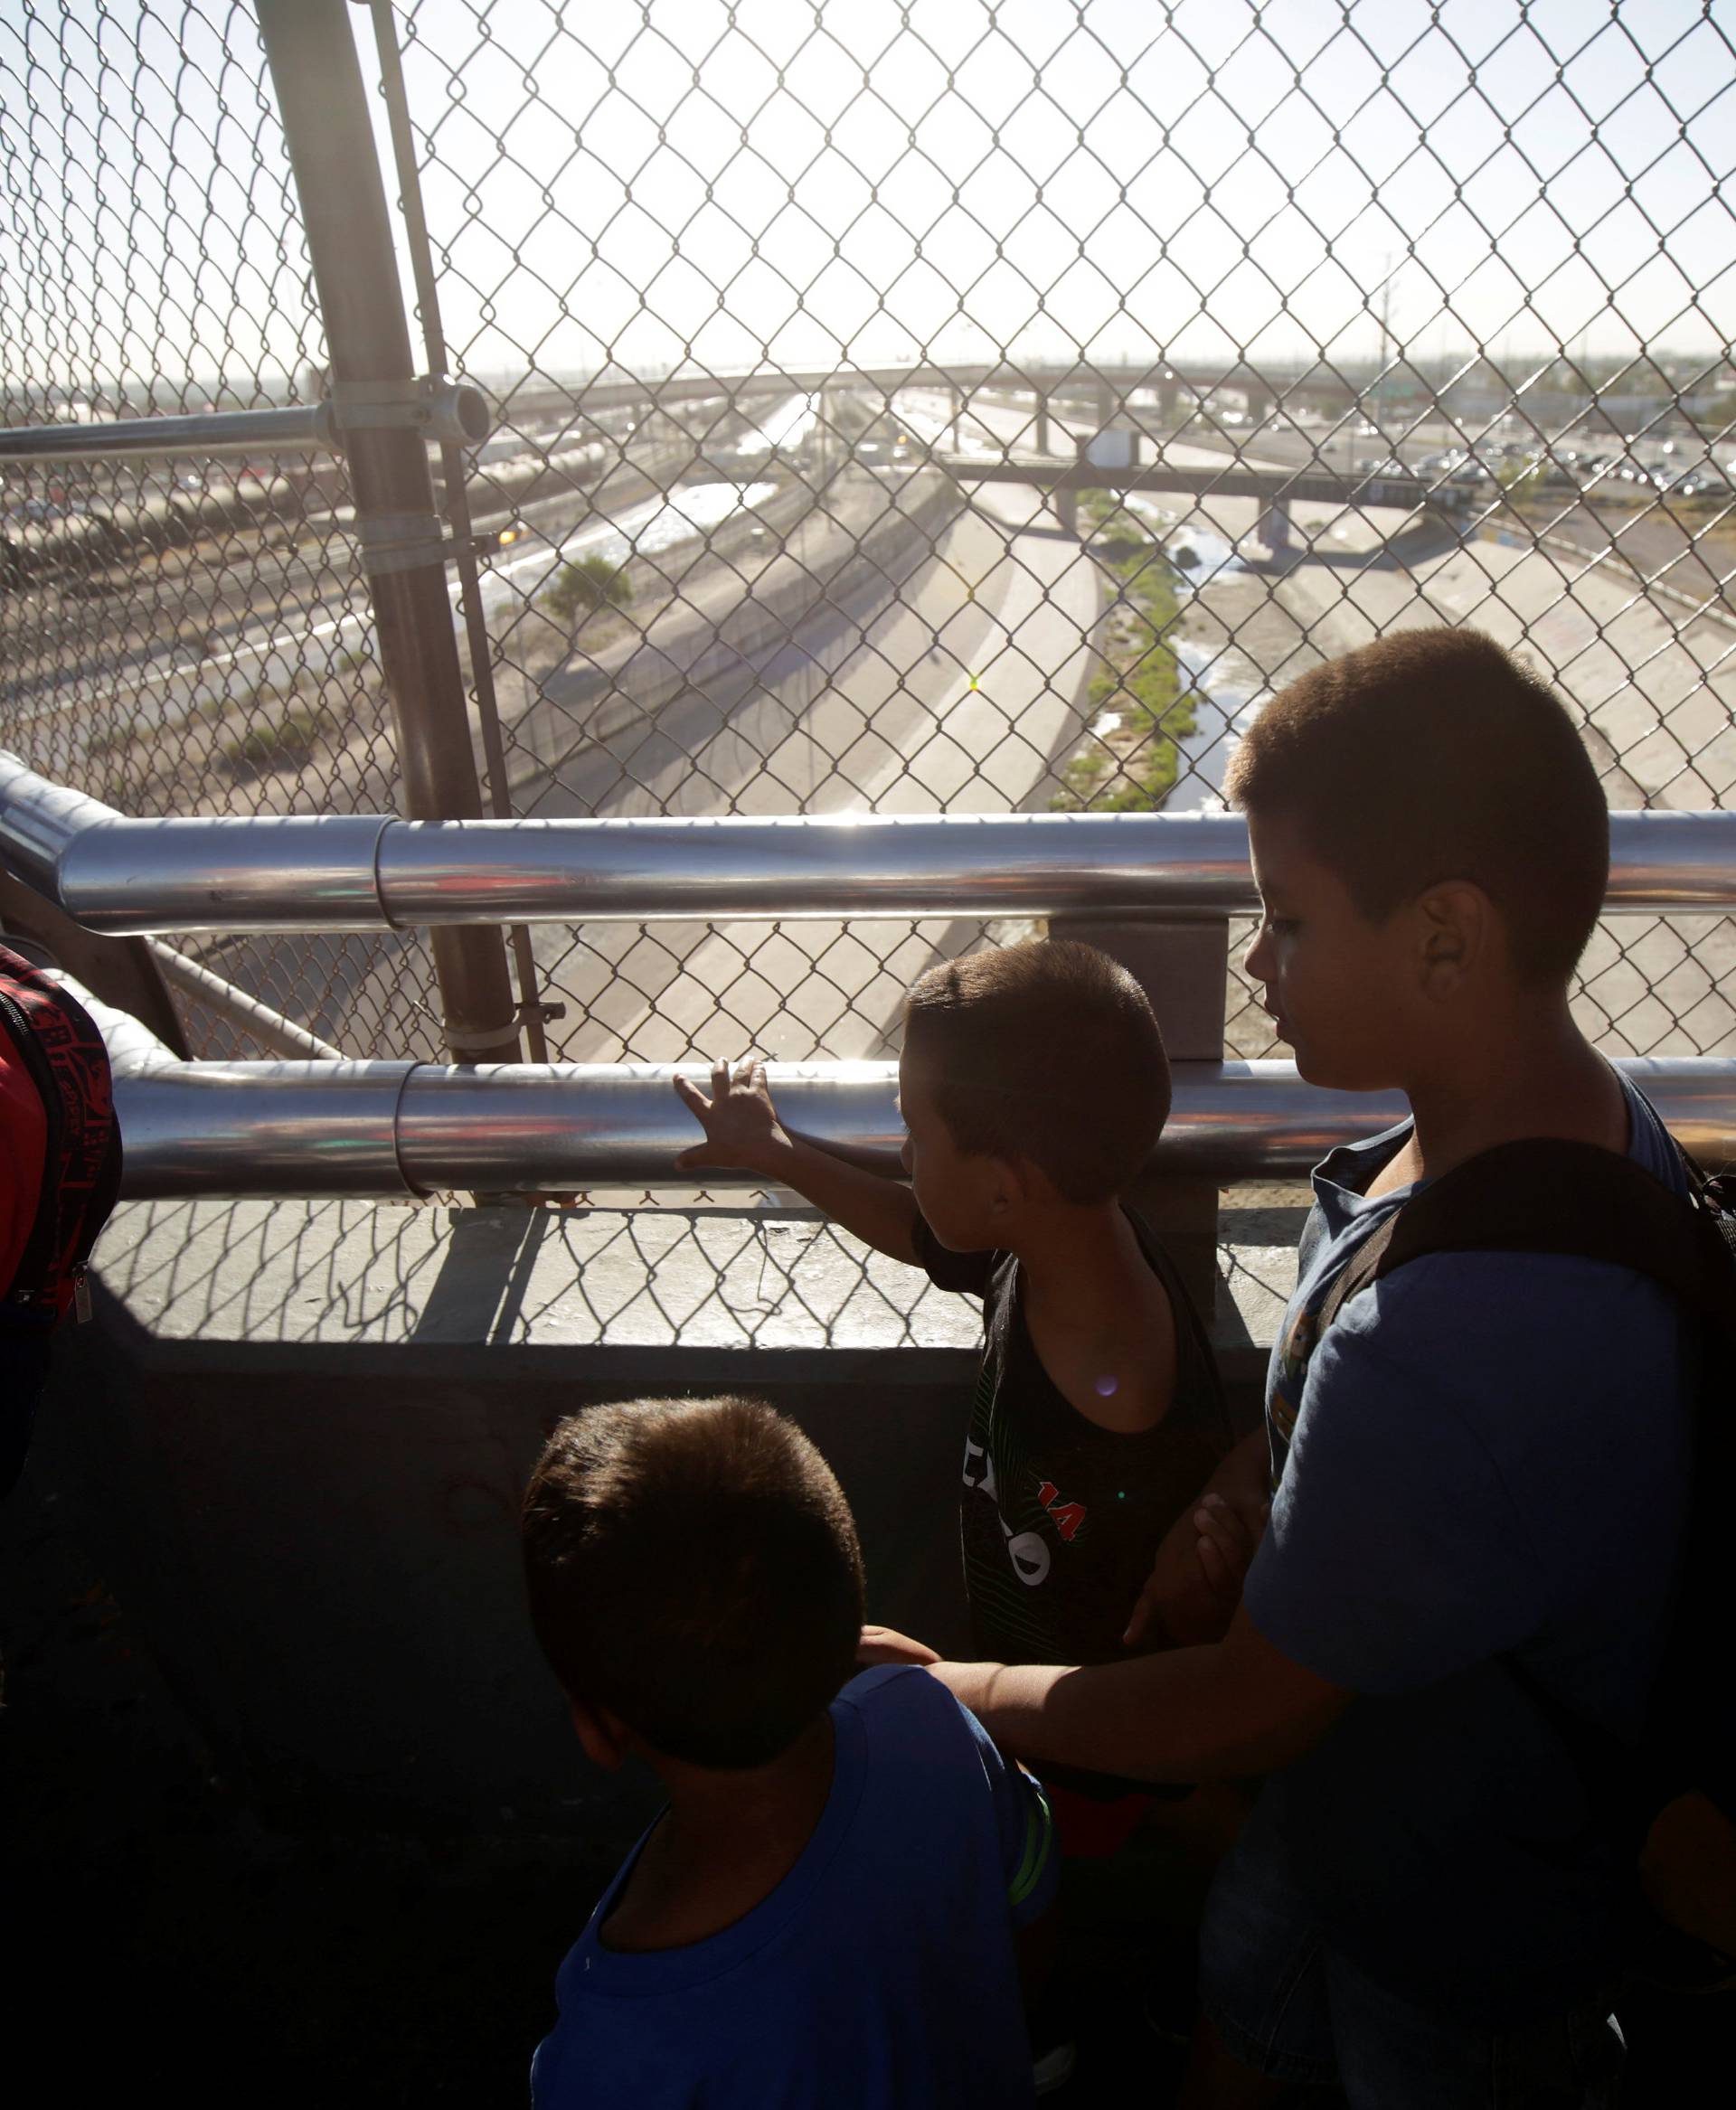 Migrant families from Mexico fleeing from violence wait to enter the United States to apply for asylum at Paso del Norte international border crossing bridge in Ciudad Juarez